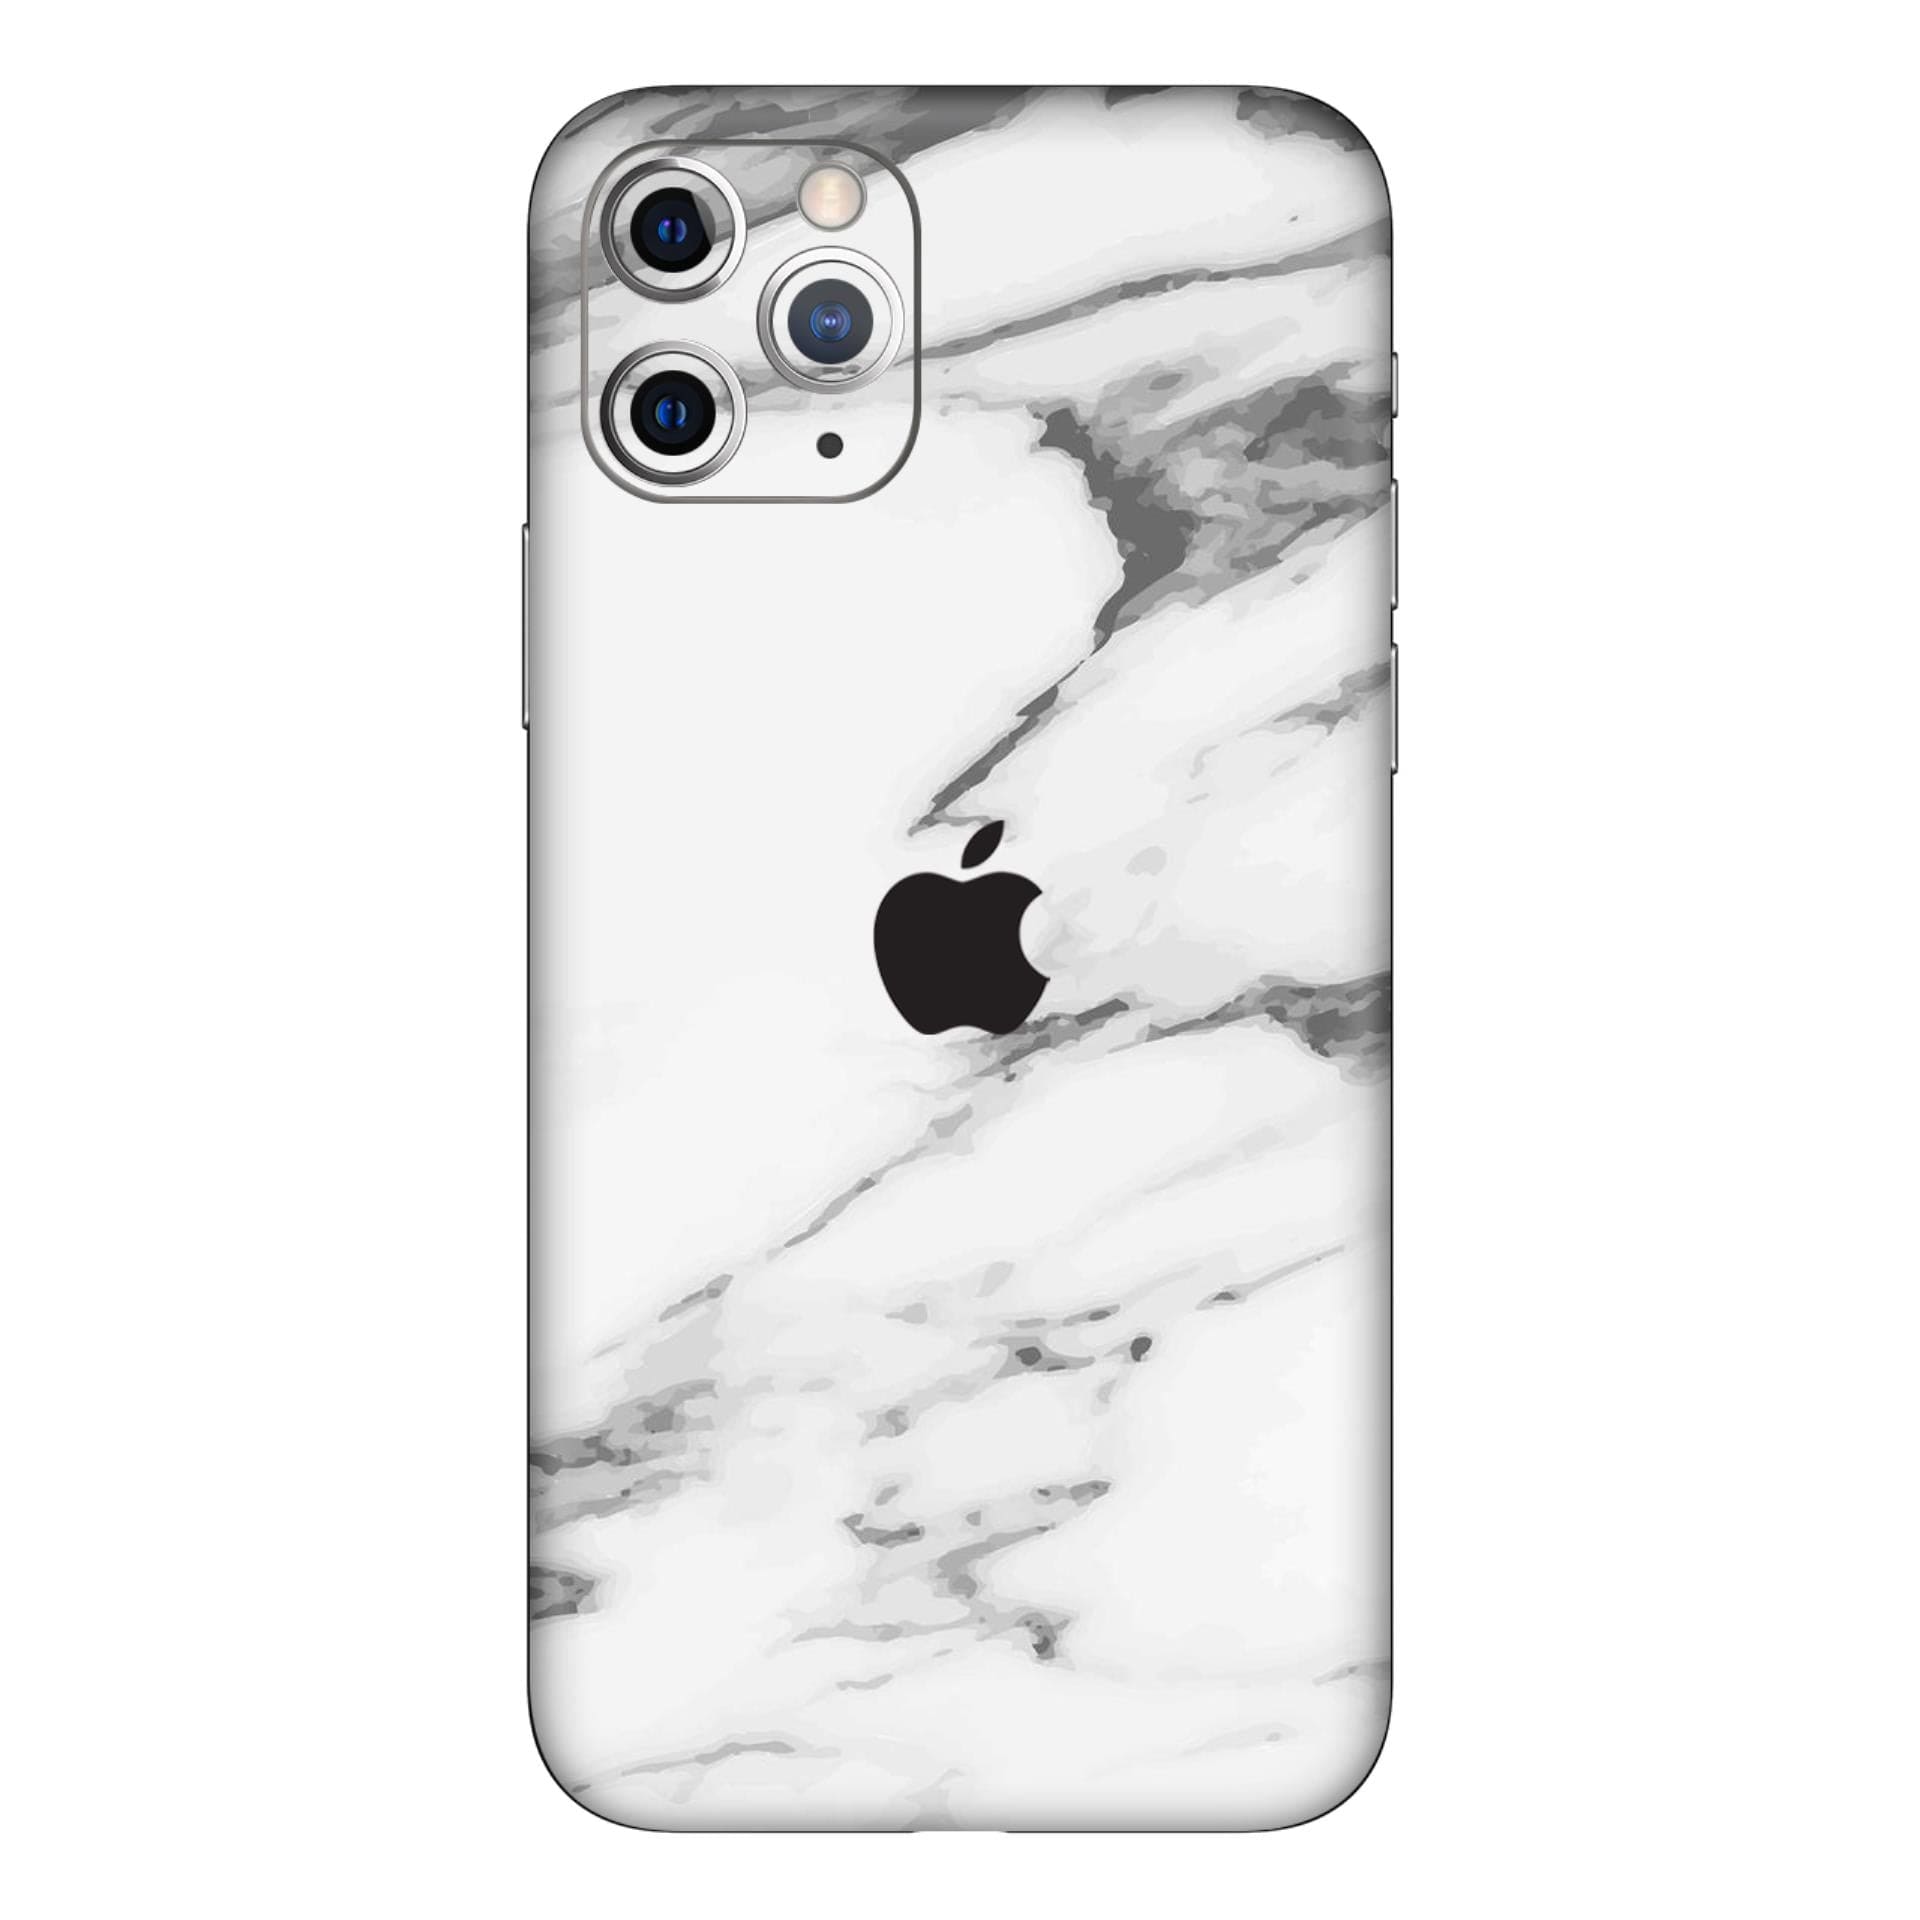 iphone 11 Pro Marble White skins